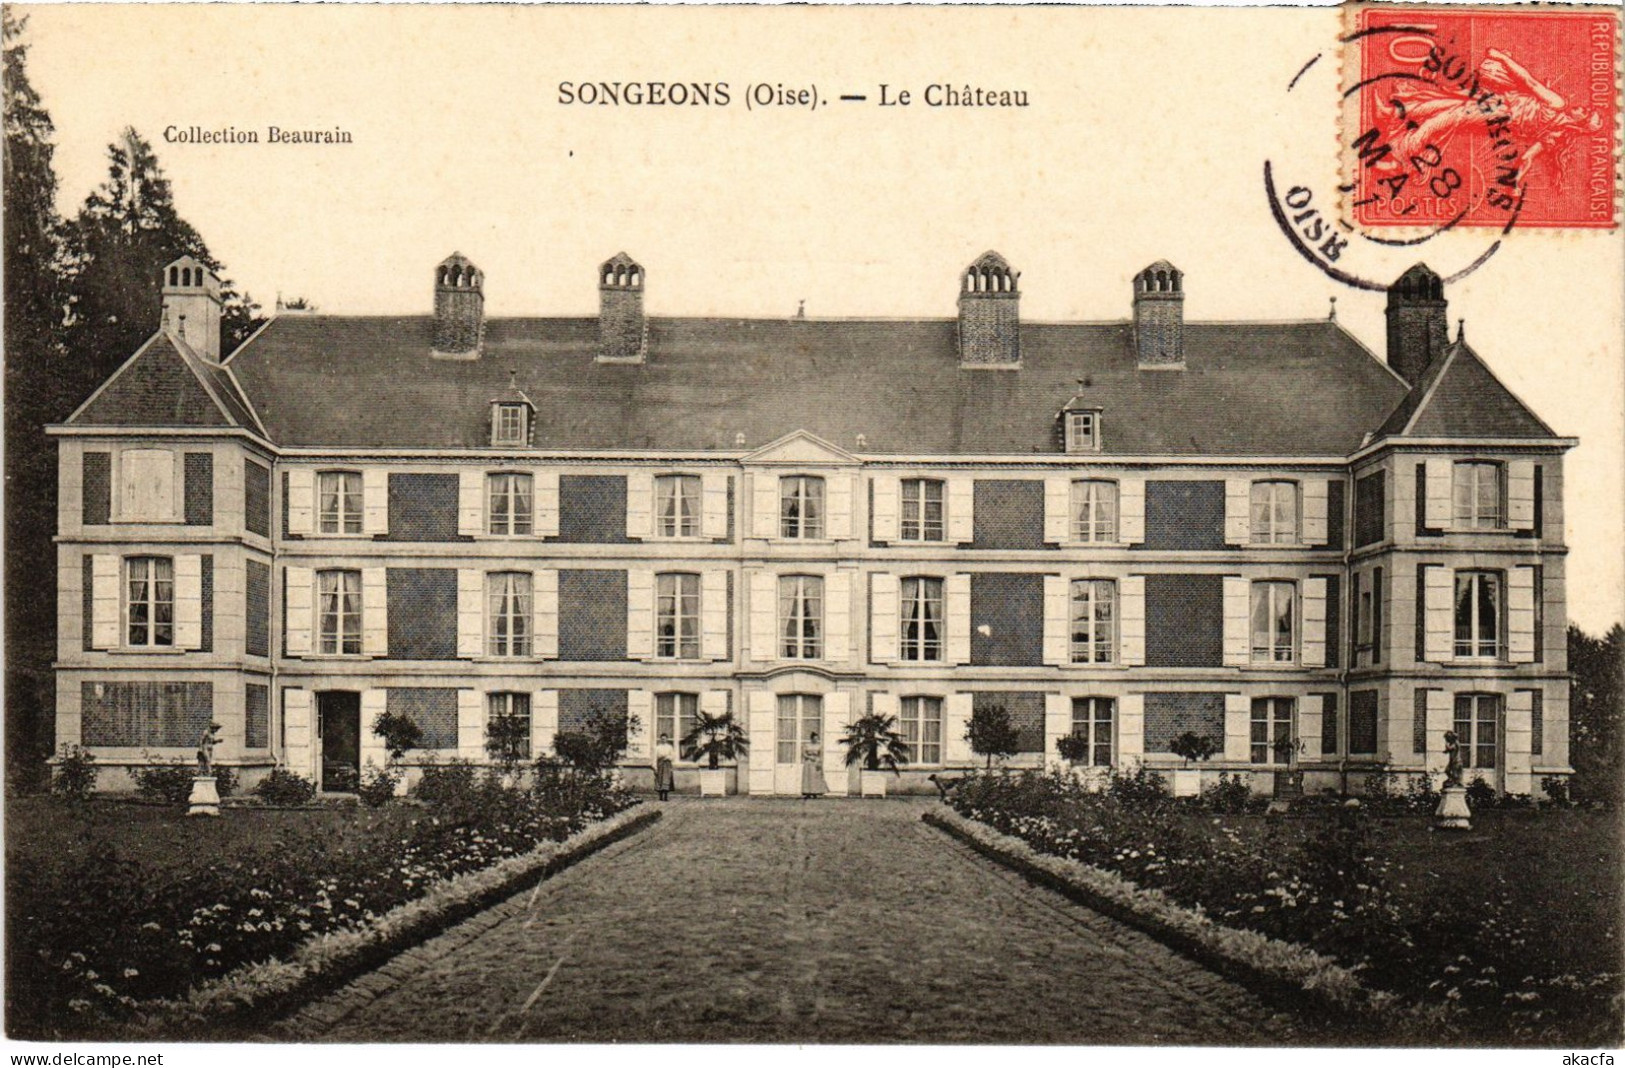 CPA Songeons Le Chateau (1187564) - Songeons